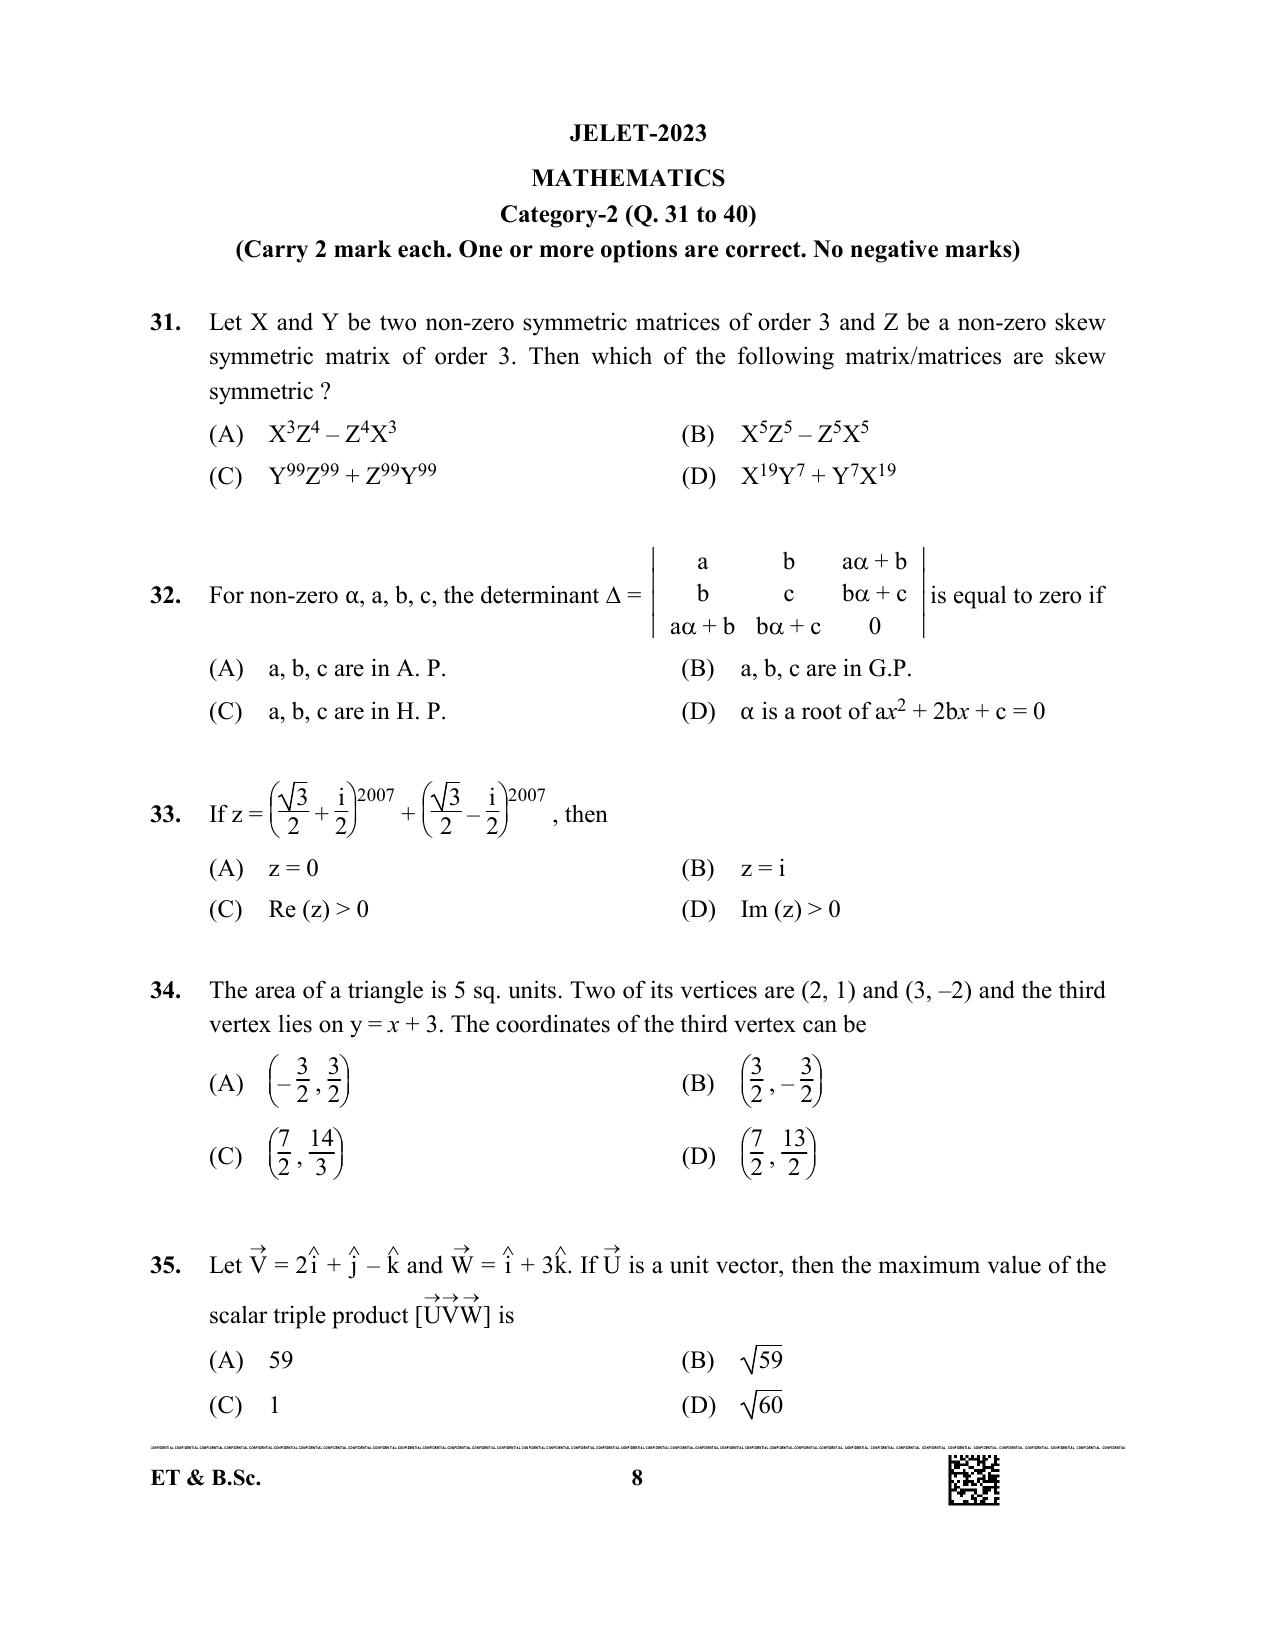 WBJEE JELET 2023 Paper I (ET & BSC) Question Papers - Page 8